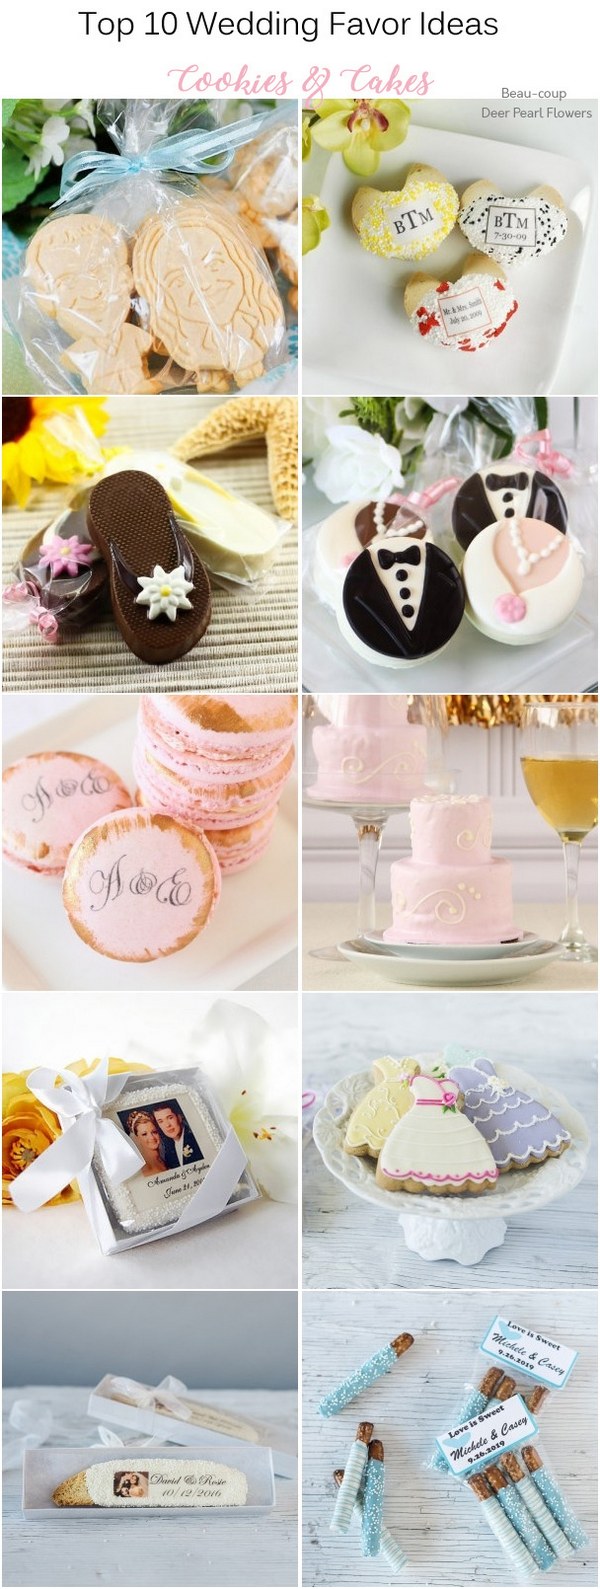 Wedding cookie and cake favors